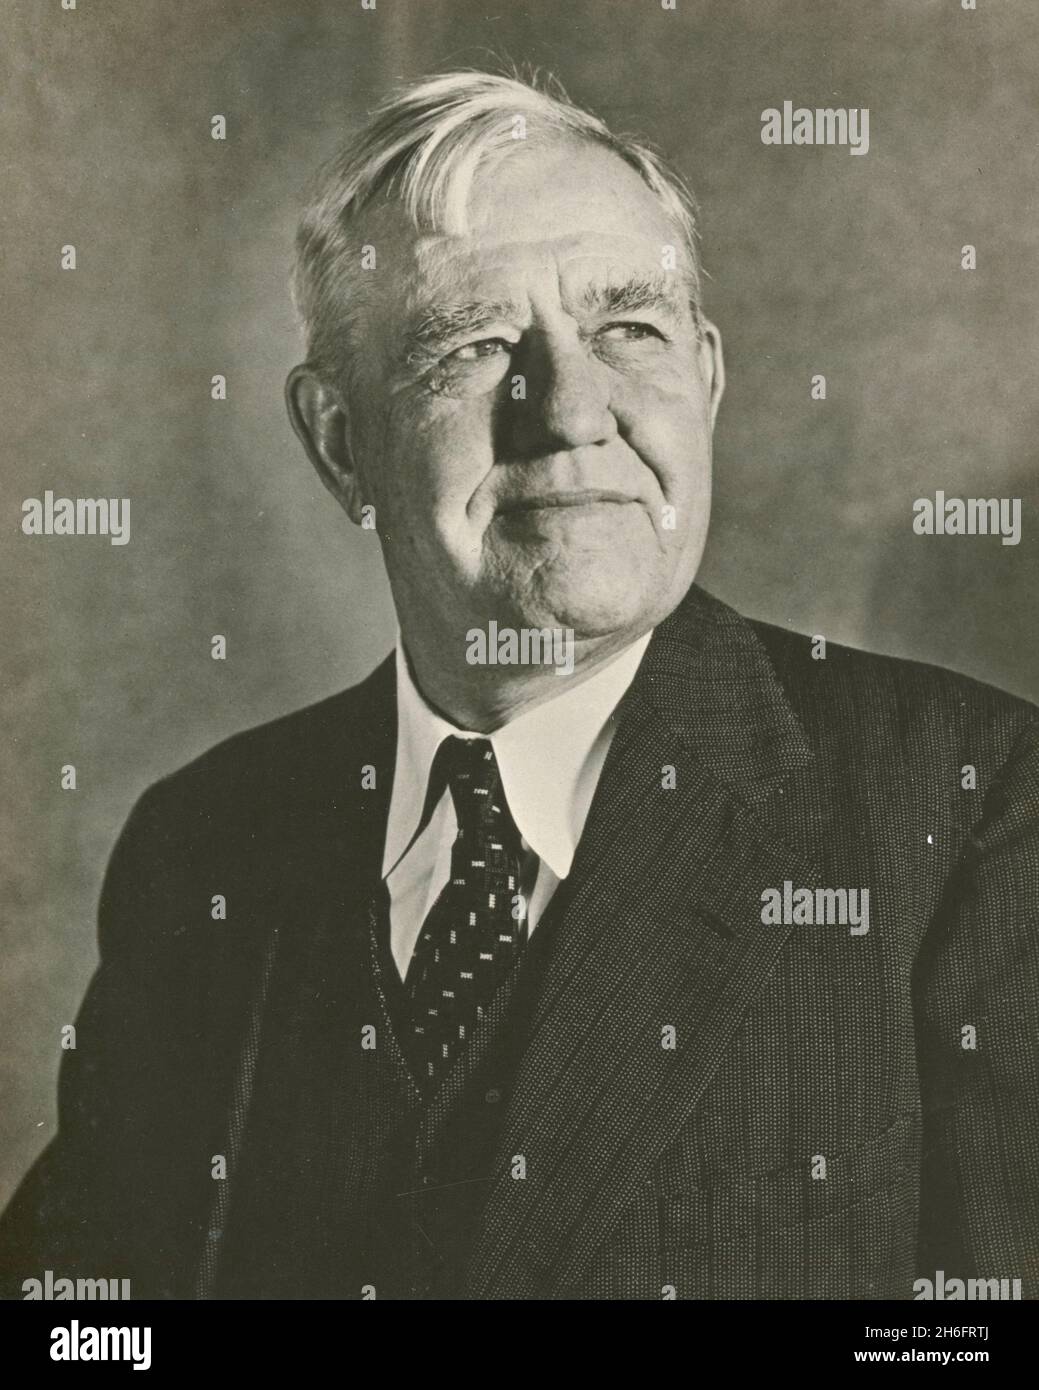 American folklore leader and author J. Frank Dobie, USA 1954 Stock Photo